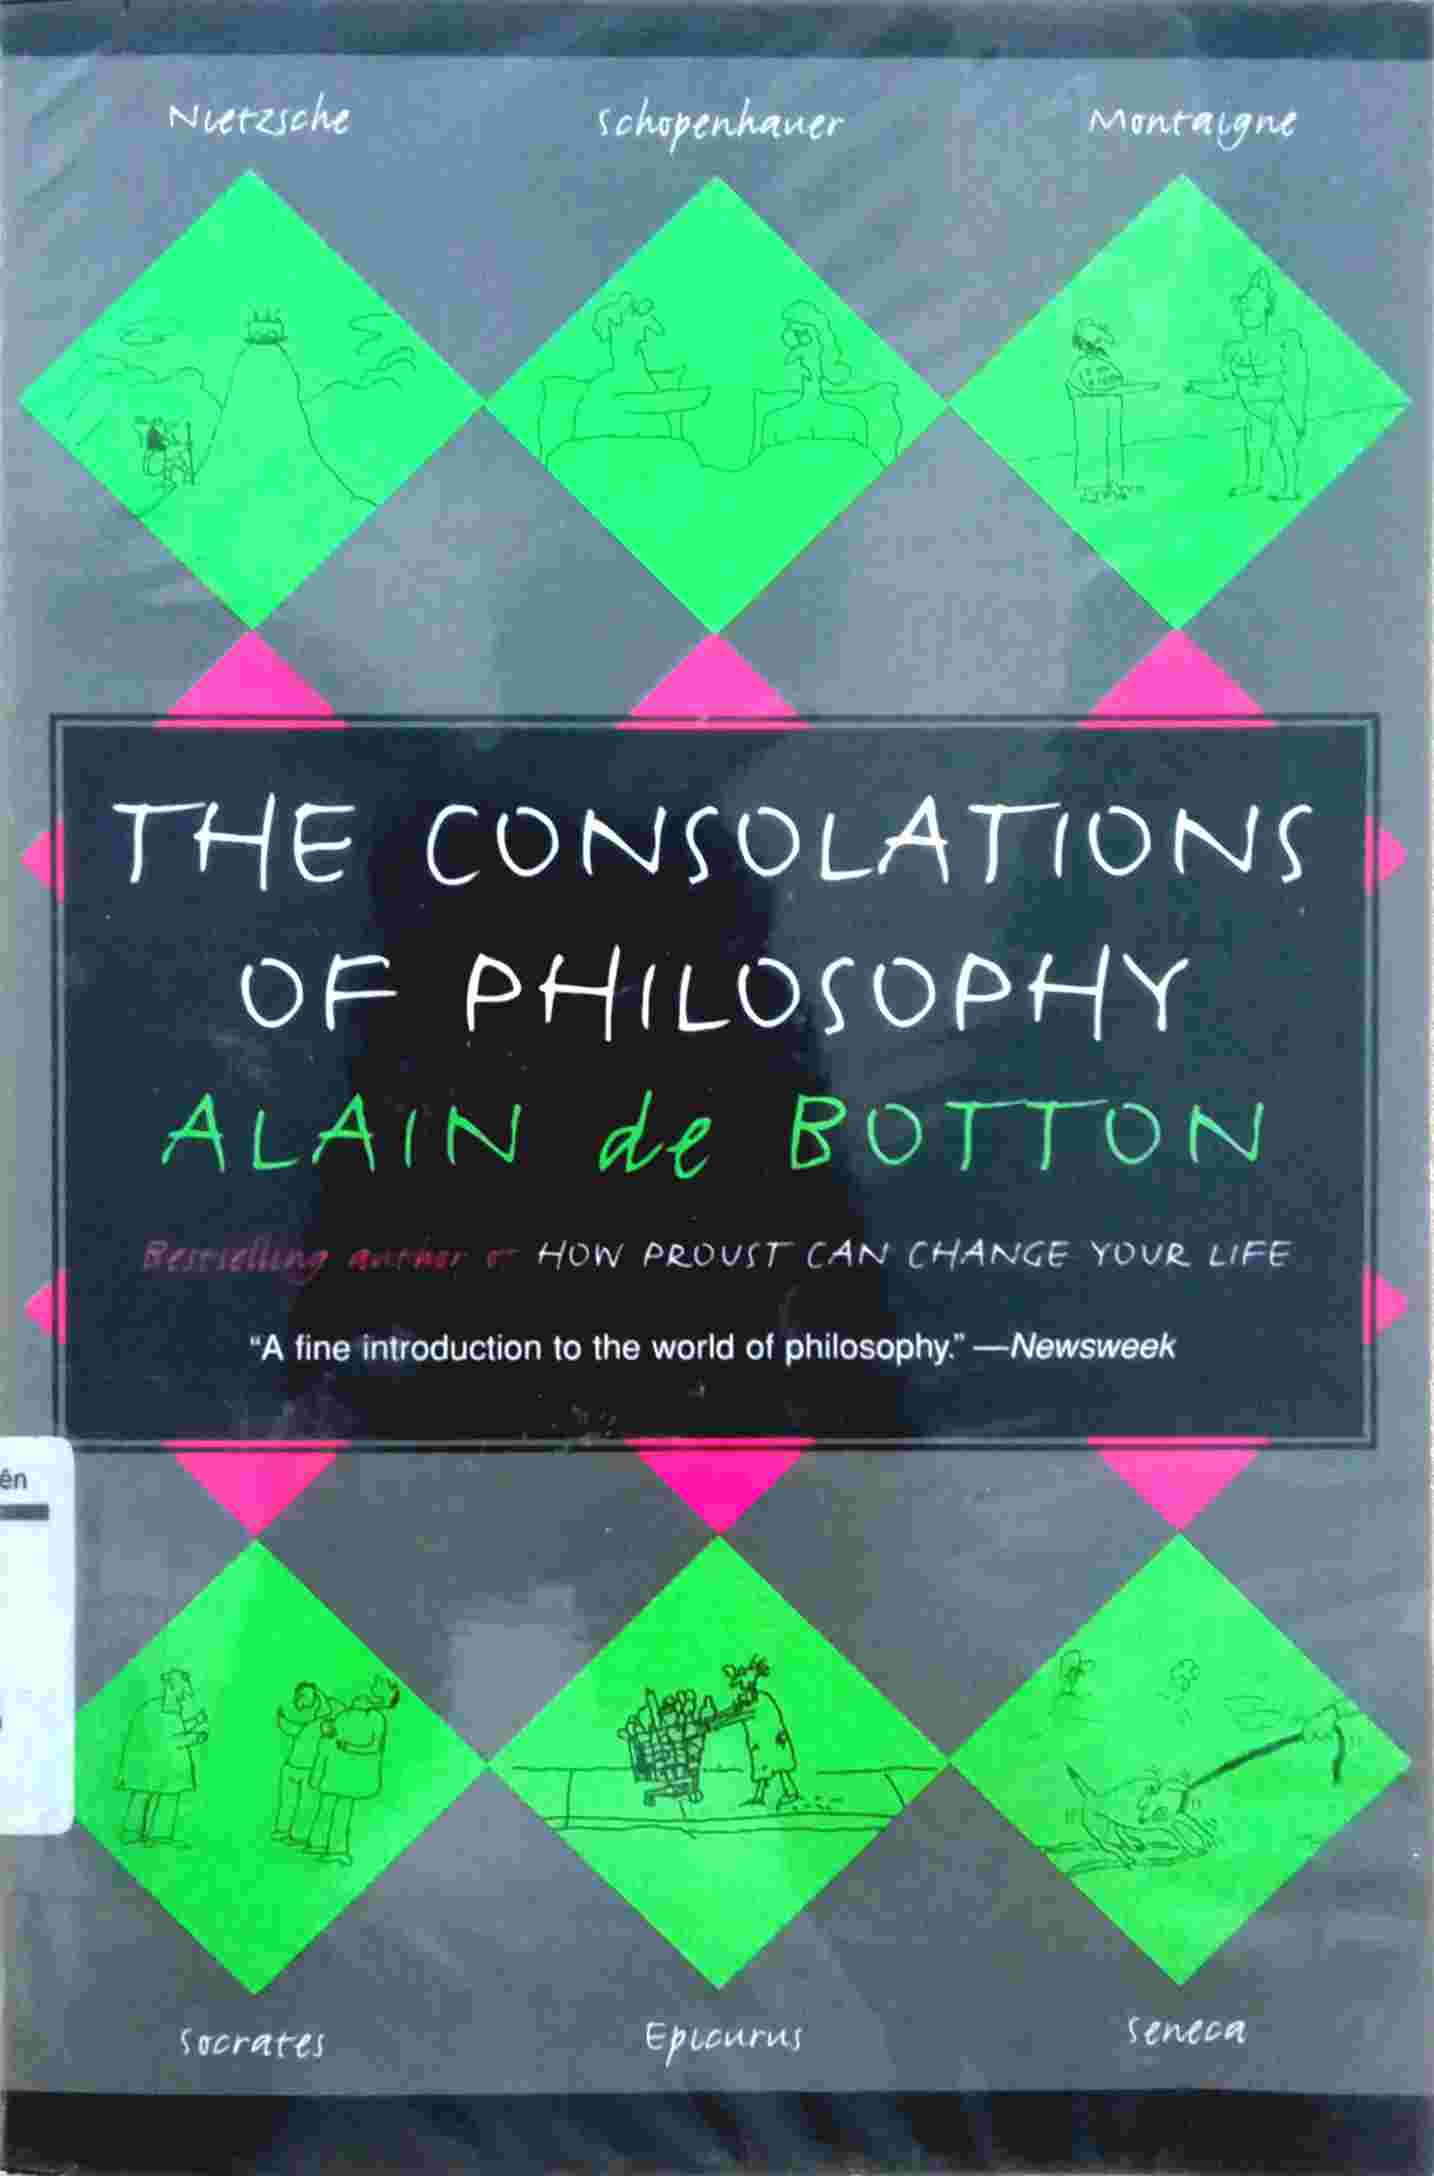 THE CONSOLATIONS OF PHILOSOPHY